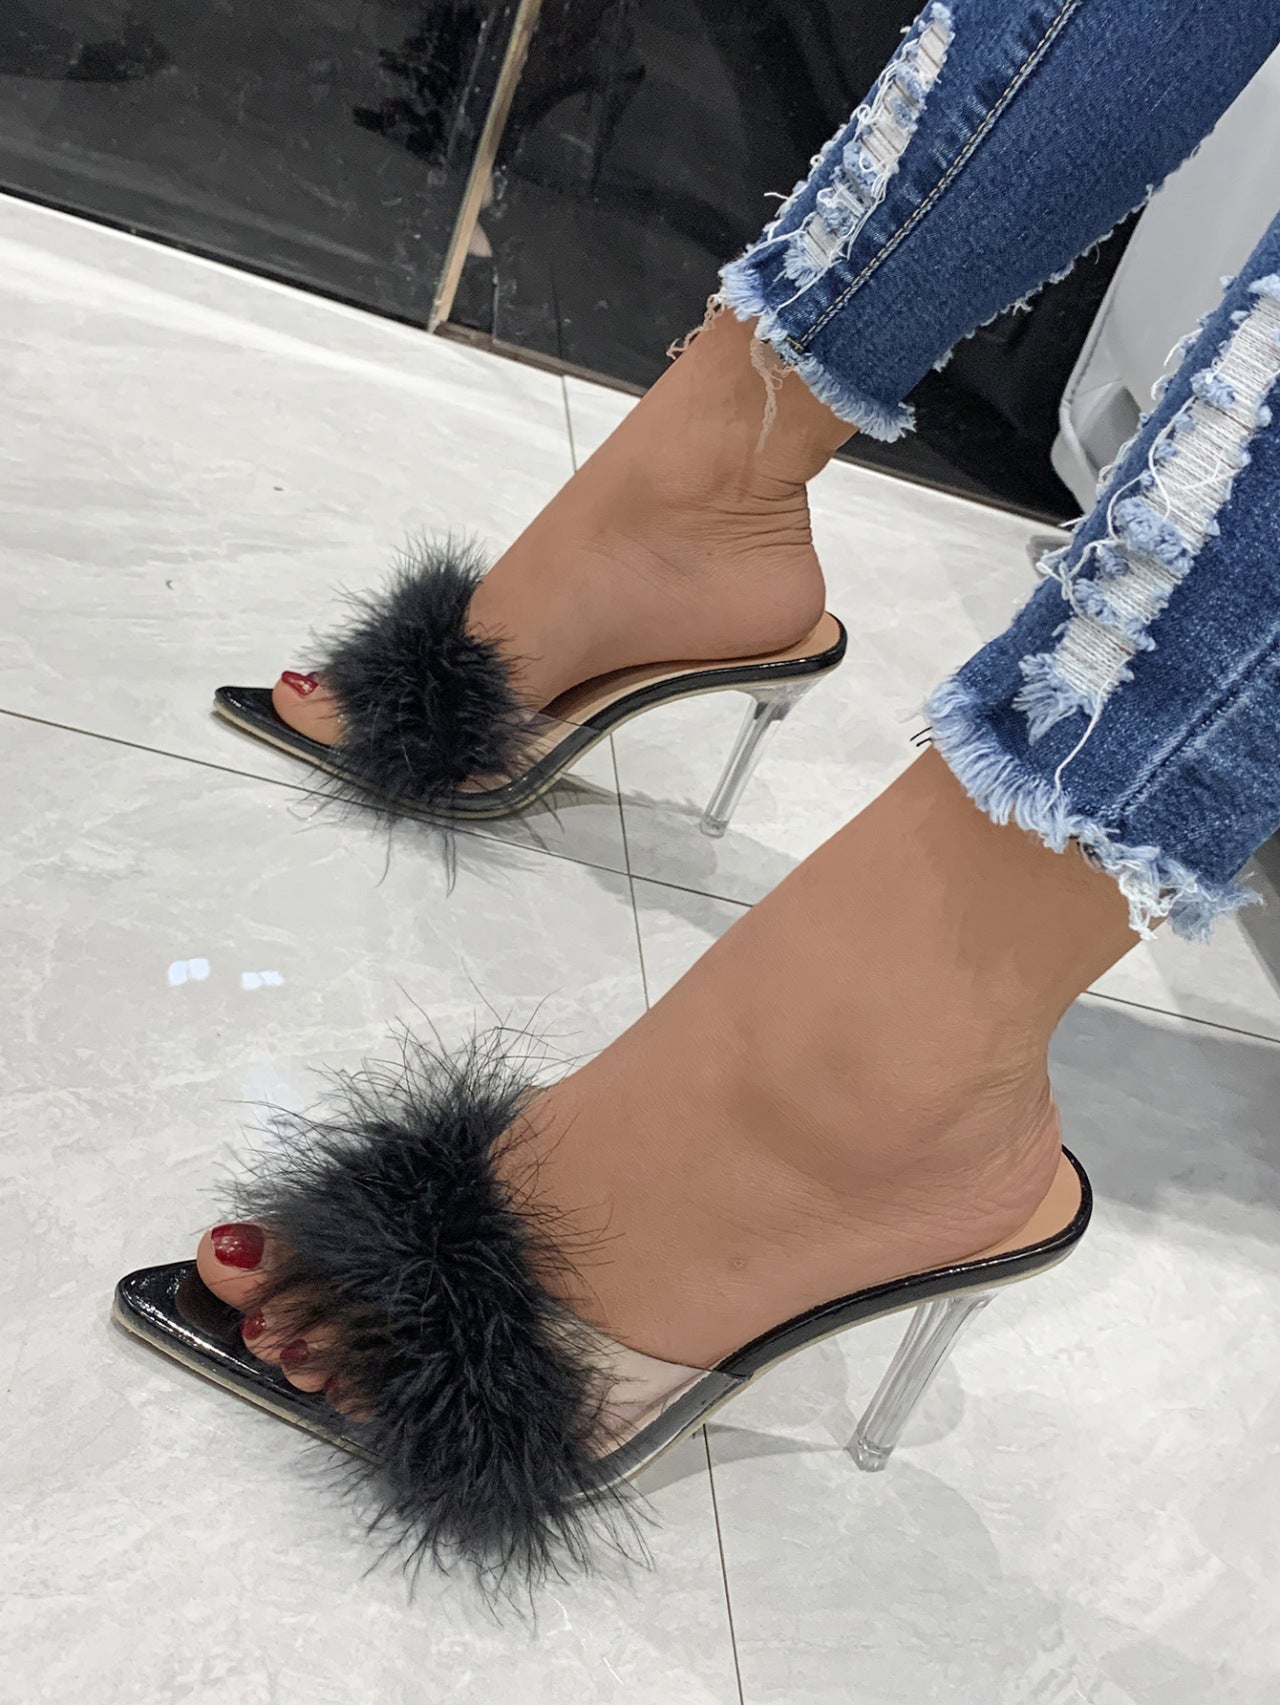 Black Boa Pointed Toe Stiletto Sandals For Women - women's shoes at TFC&H Co.